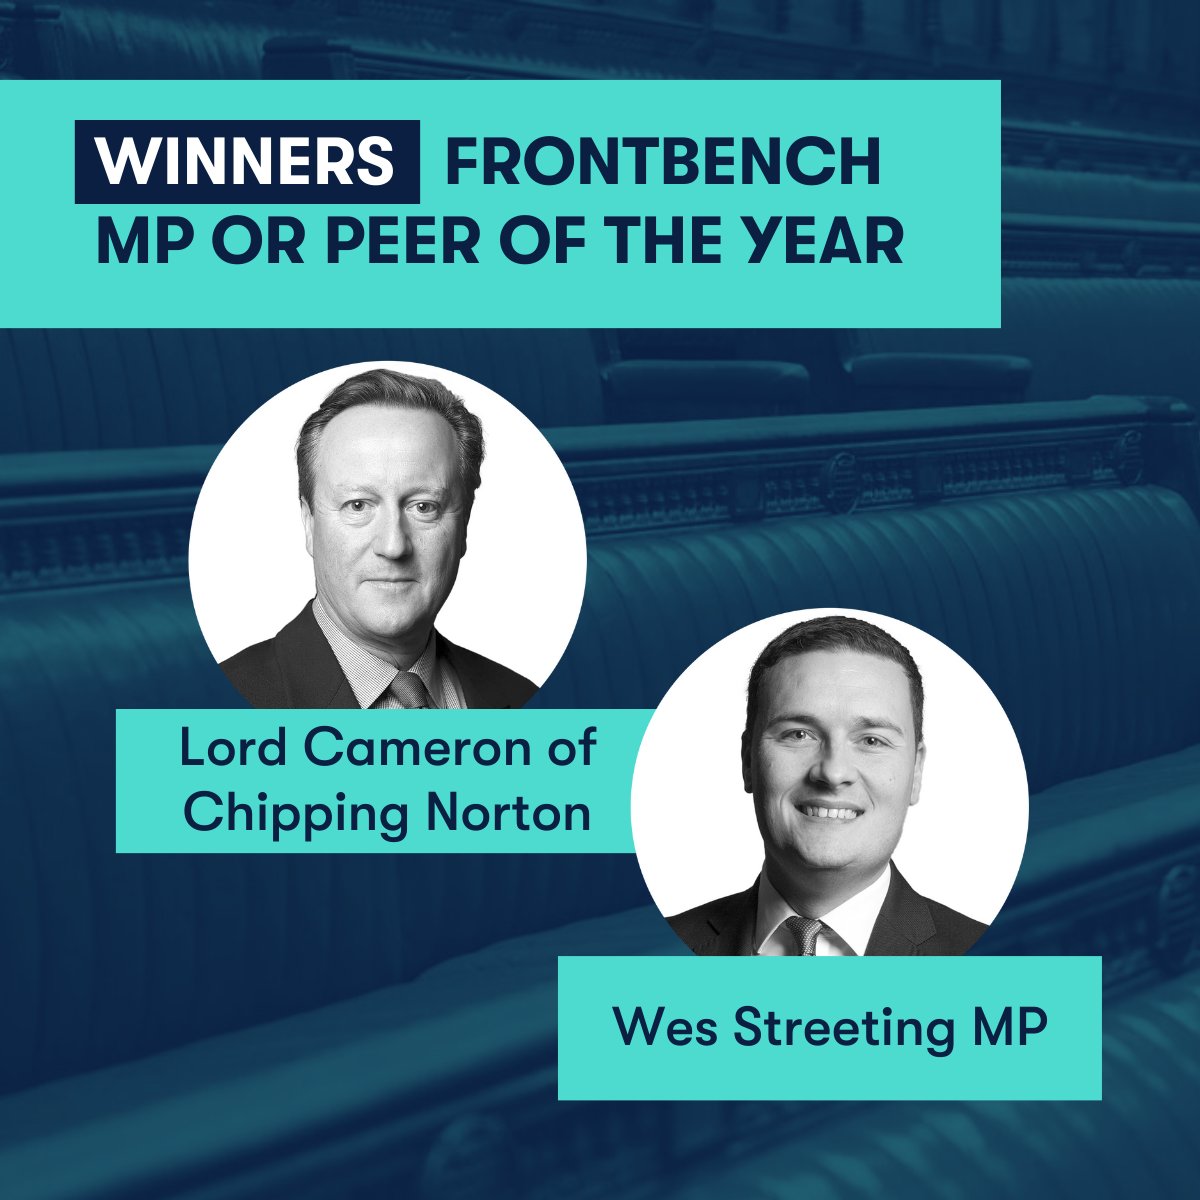 The winners of ‘Frontbench MP or Peer of the Year’ are Lord Cameron and Wes Streeting! Massive congratulations to both, @David_Cameron and @wesstreeting! #PagefieldParliamentarianAwards